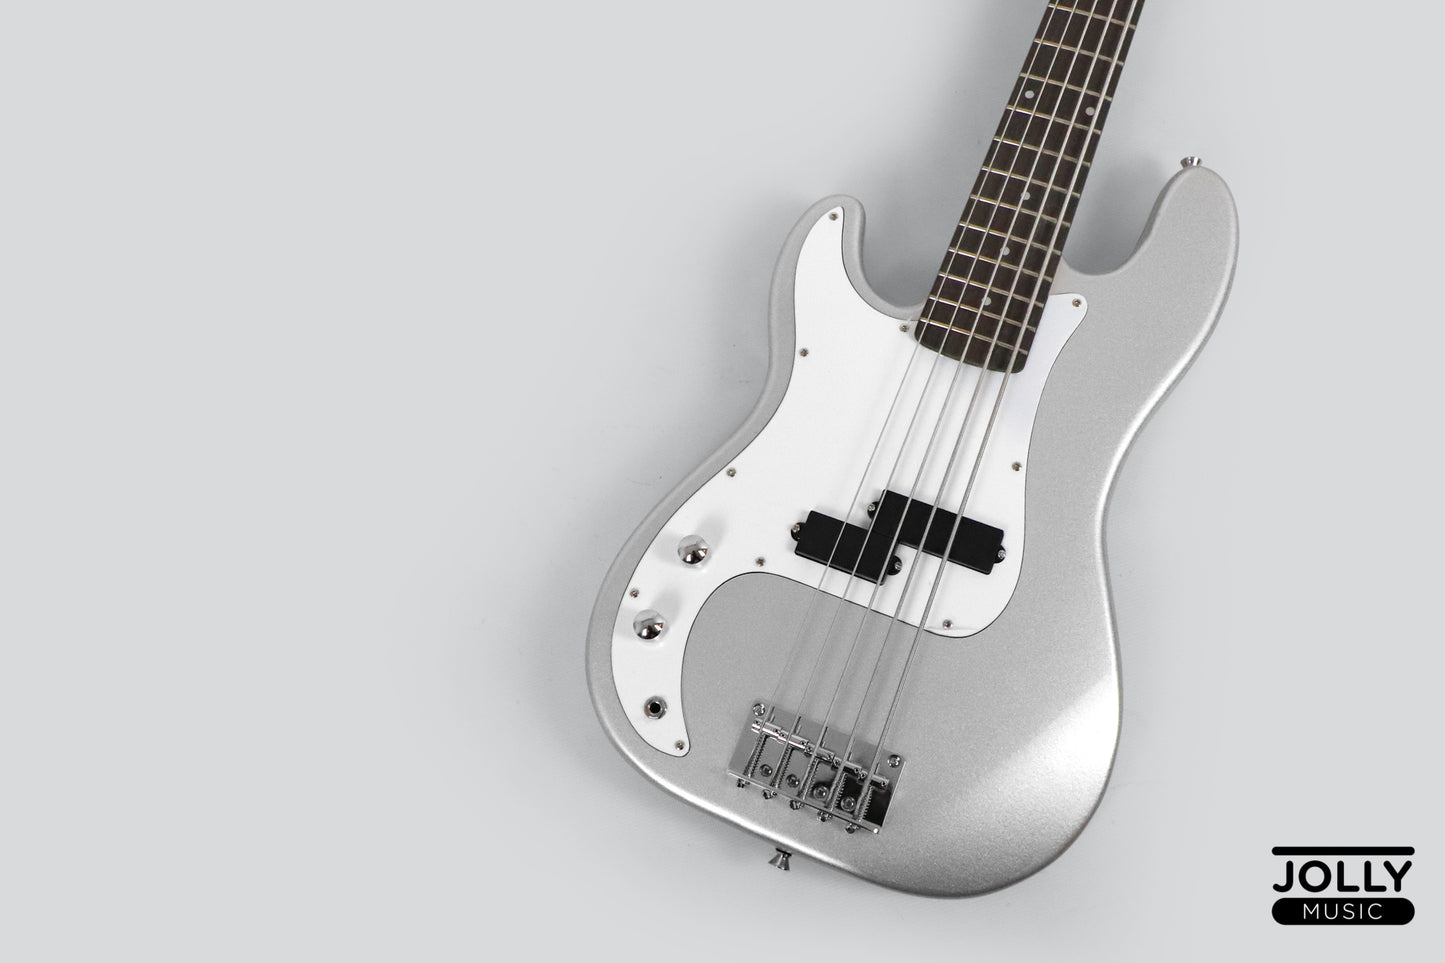 JCraft PB-1 Left Handed 5-String Electric Bass Guitar with Gigbag - Silver Sky